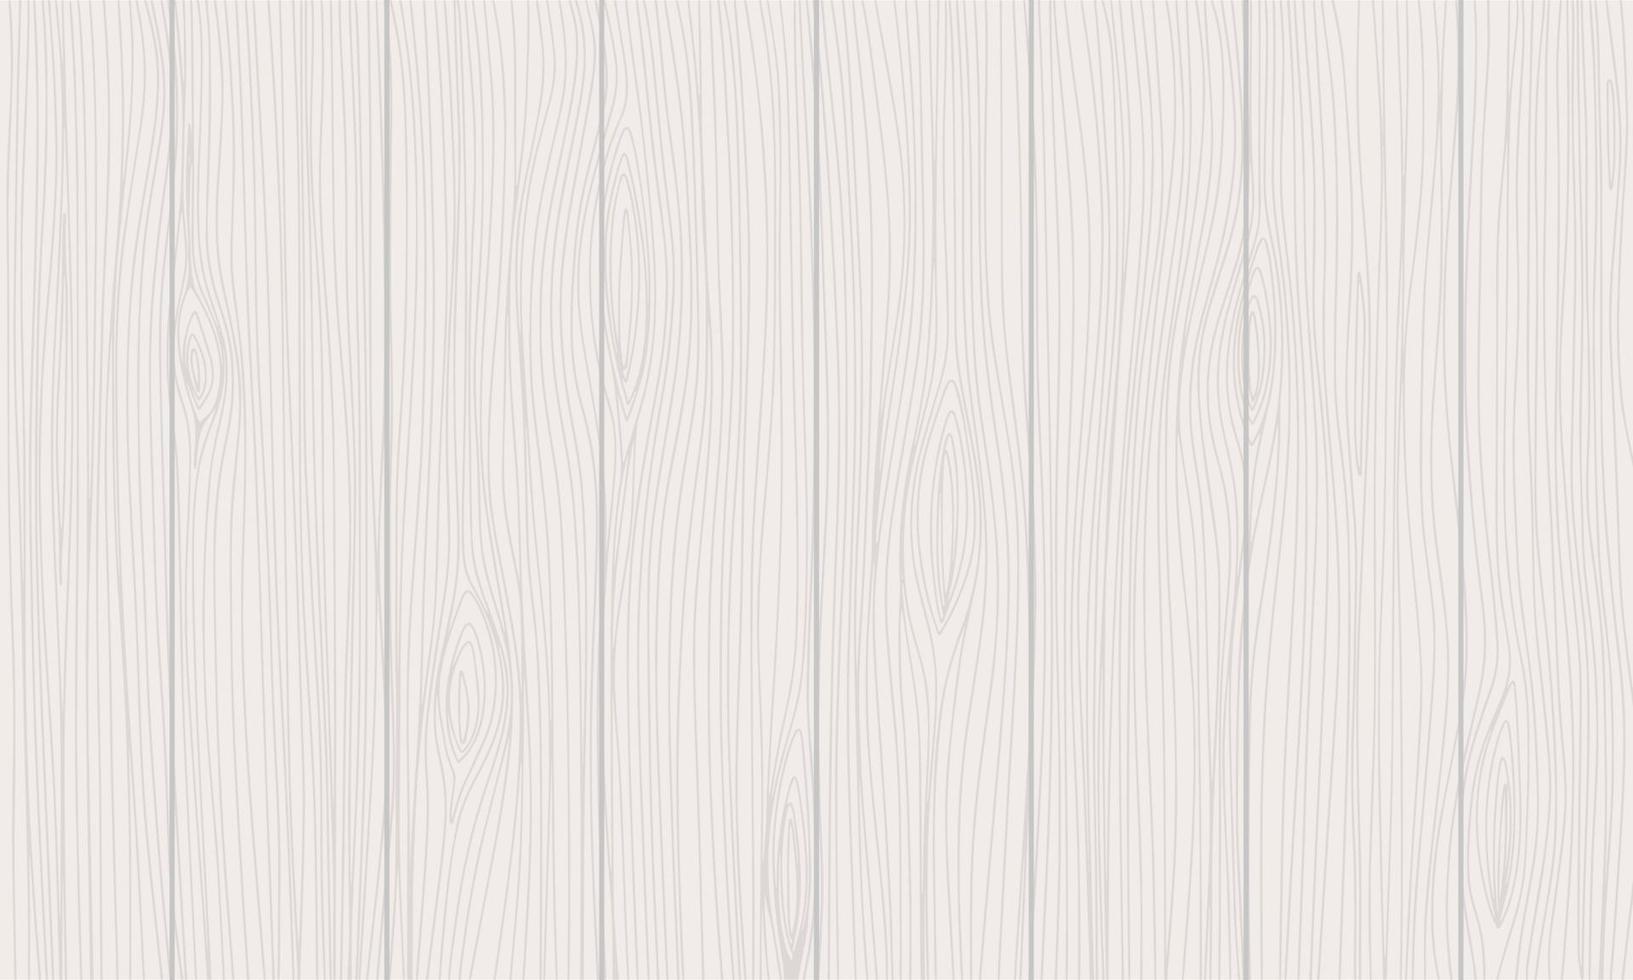 Light grey wood background. Hand drawn nature wooden background. Vector illustration